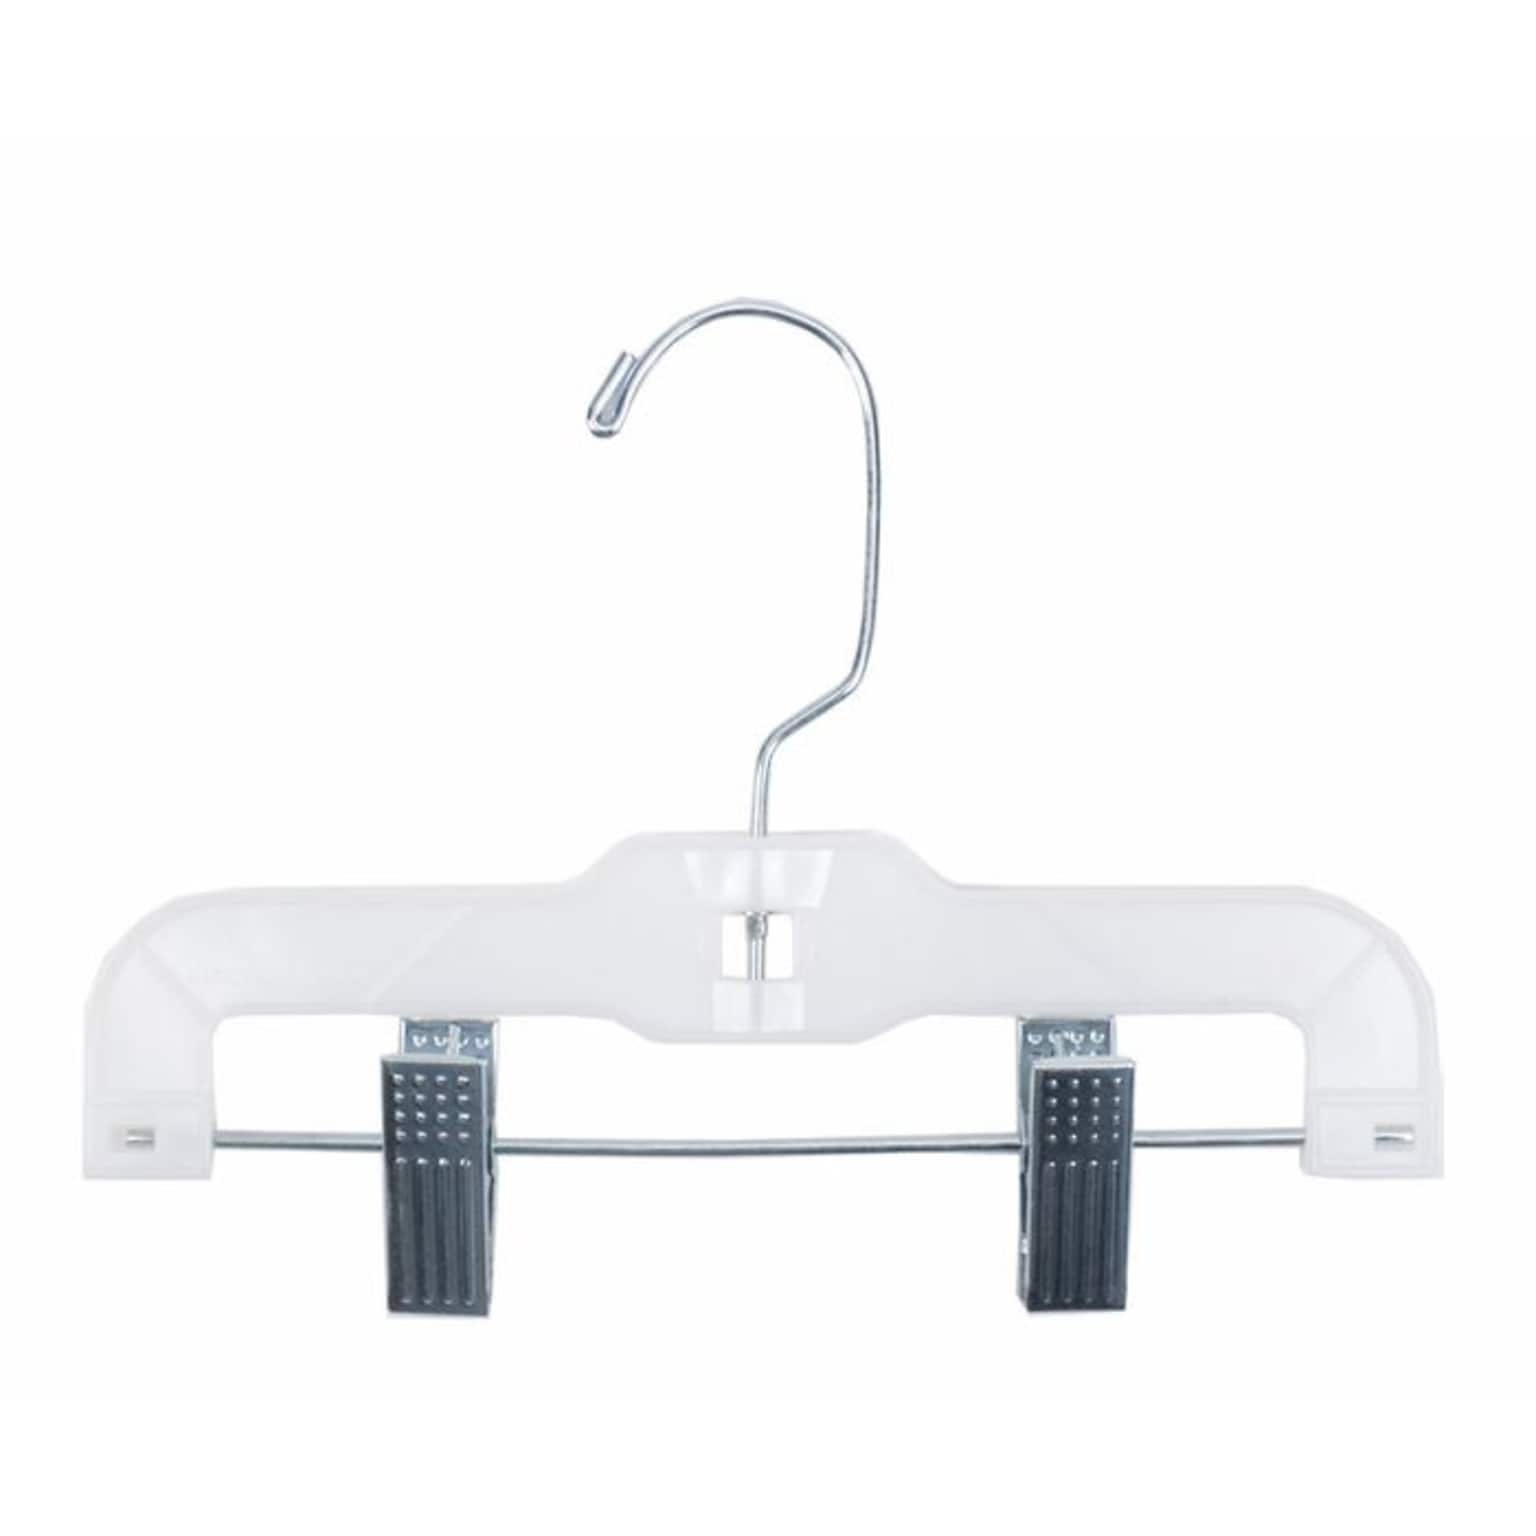 NAHANCO Plastic Hi-Impact Super Heavy Weight Hanger With Metal Clips, White, 100/Pack